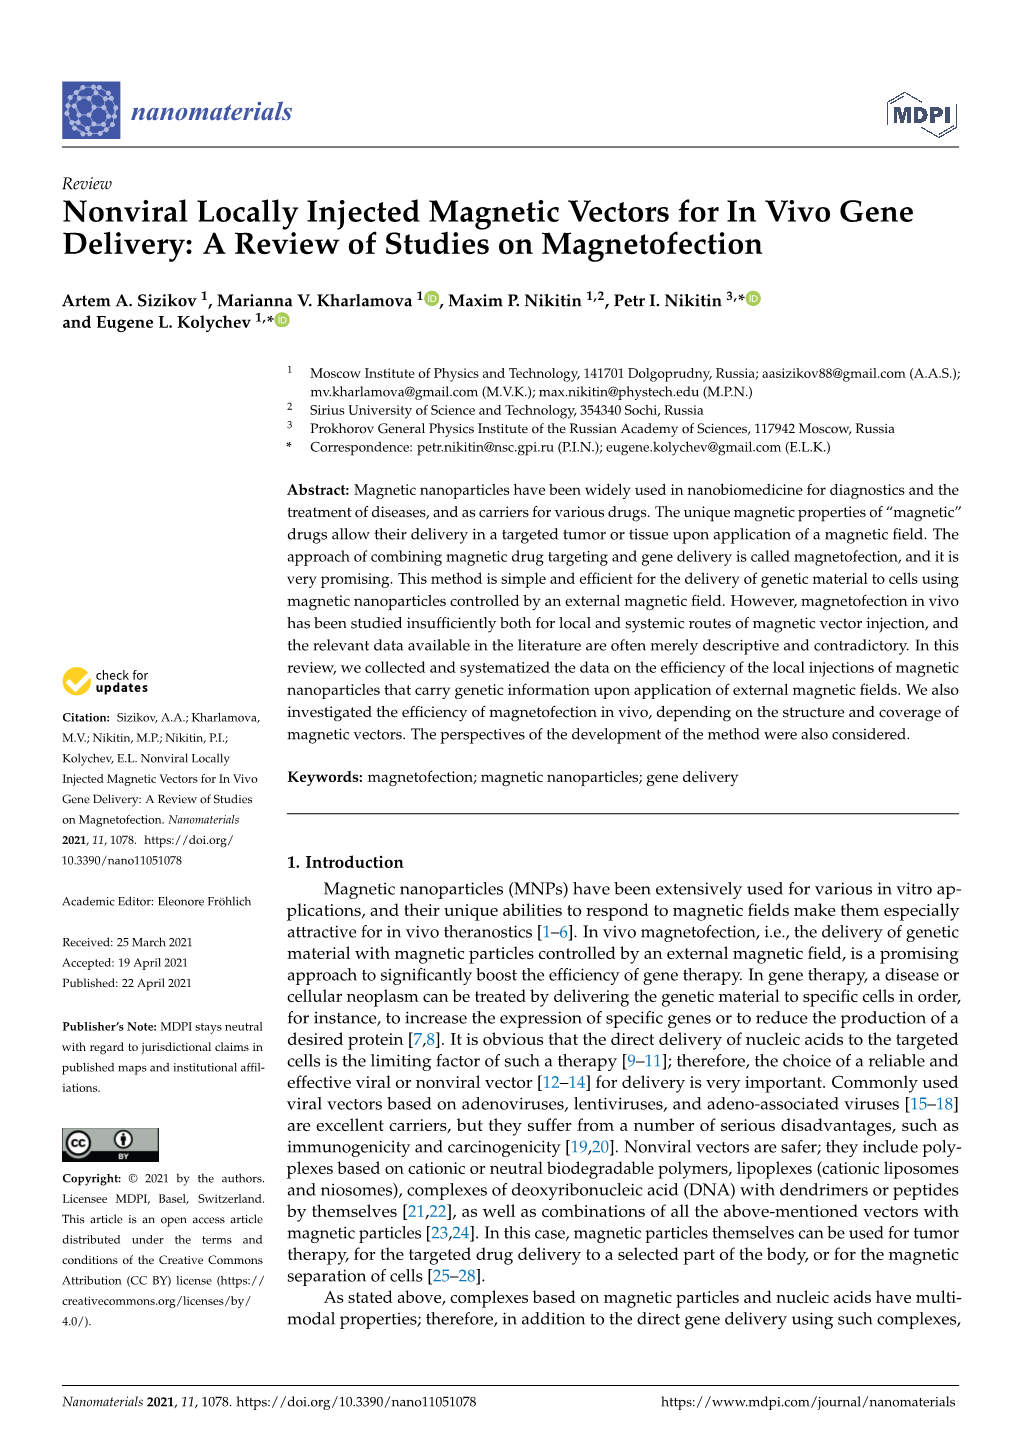 Nonviral Locally Injected Magnetic Vectors for in Vivo Gene Delivery: a Review of Studies on Magnetofection